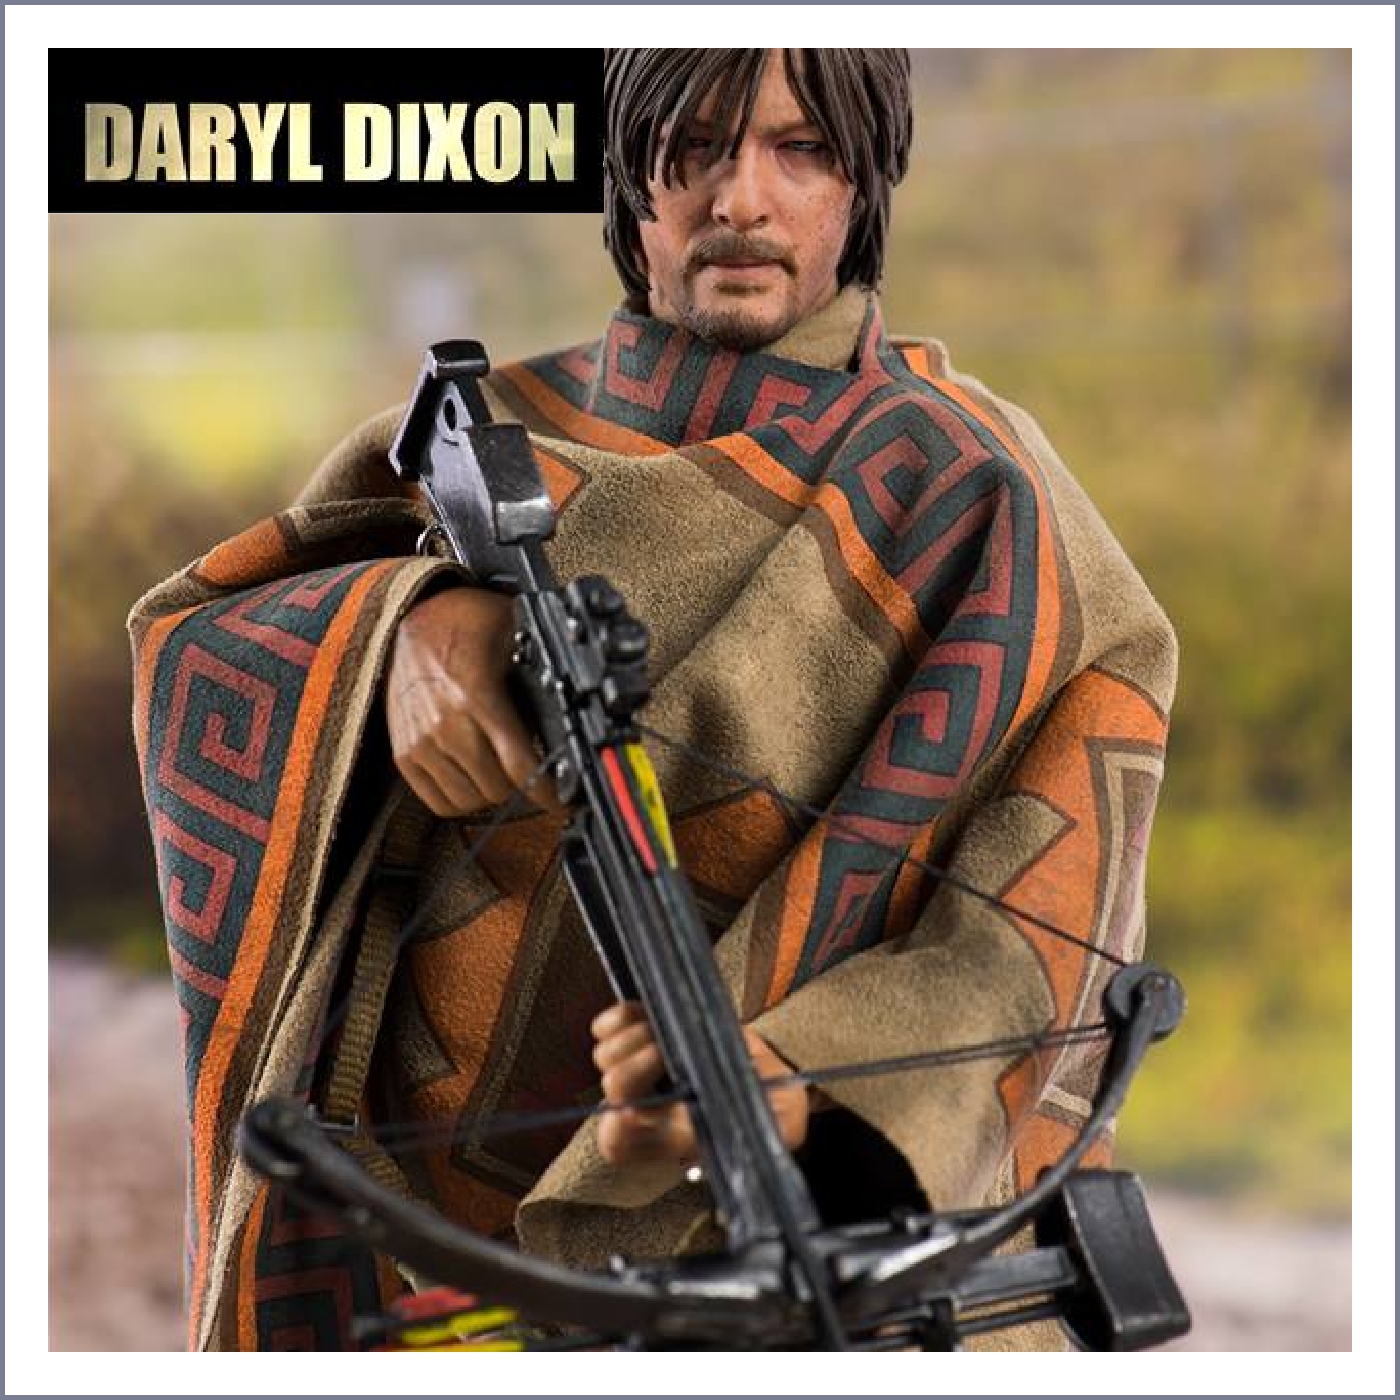 Daryl Dixon Deluxe Edition Full set Action Figure